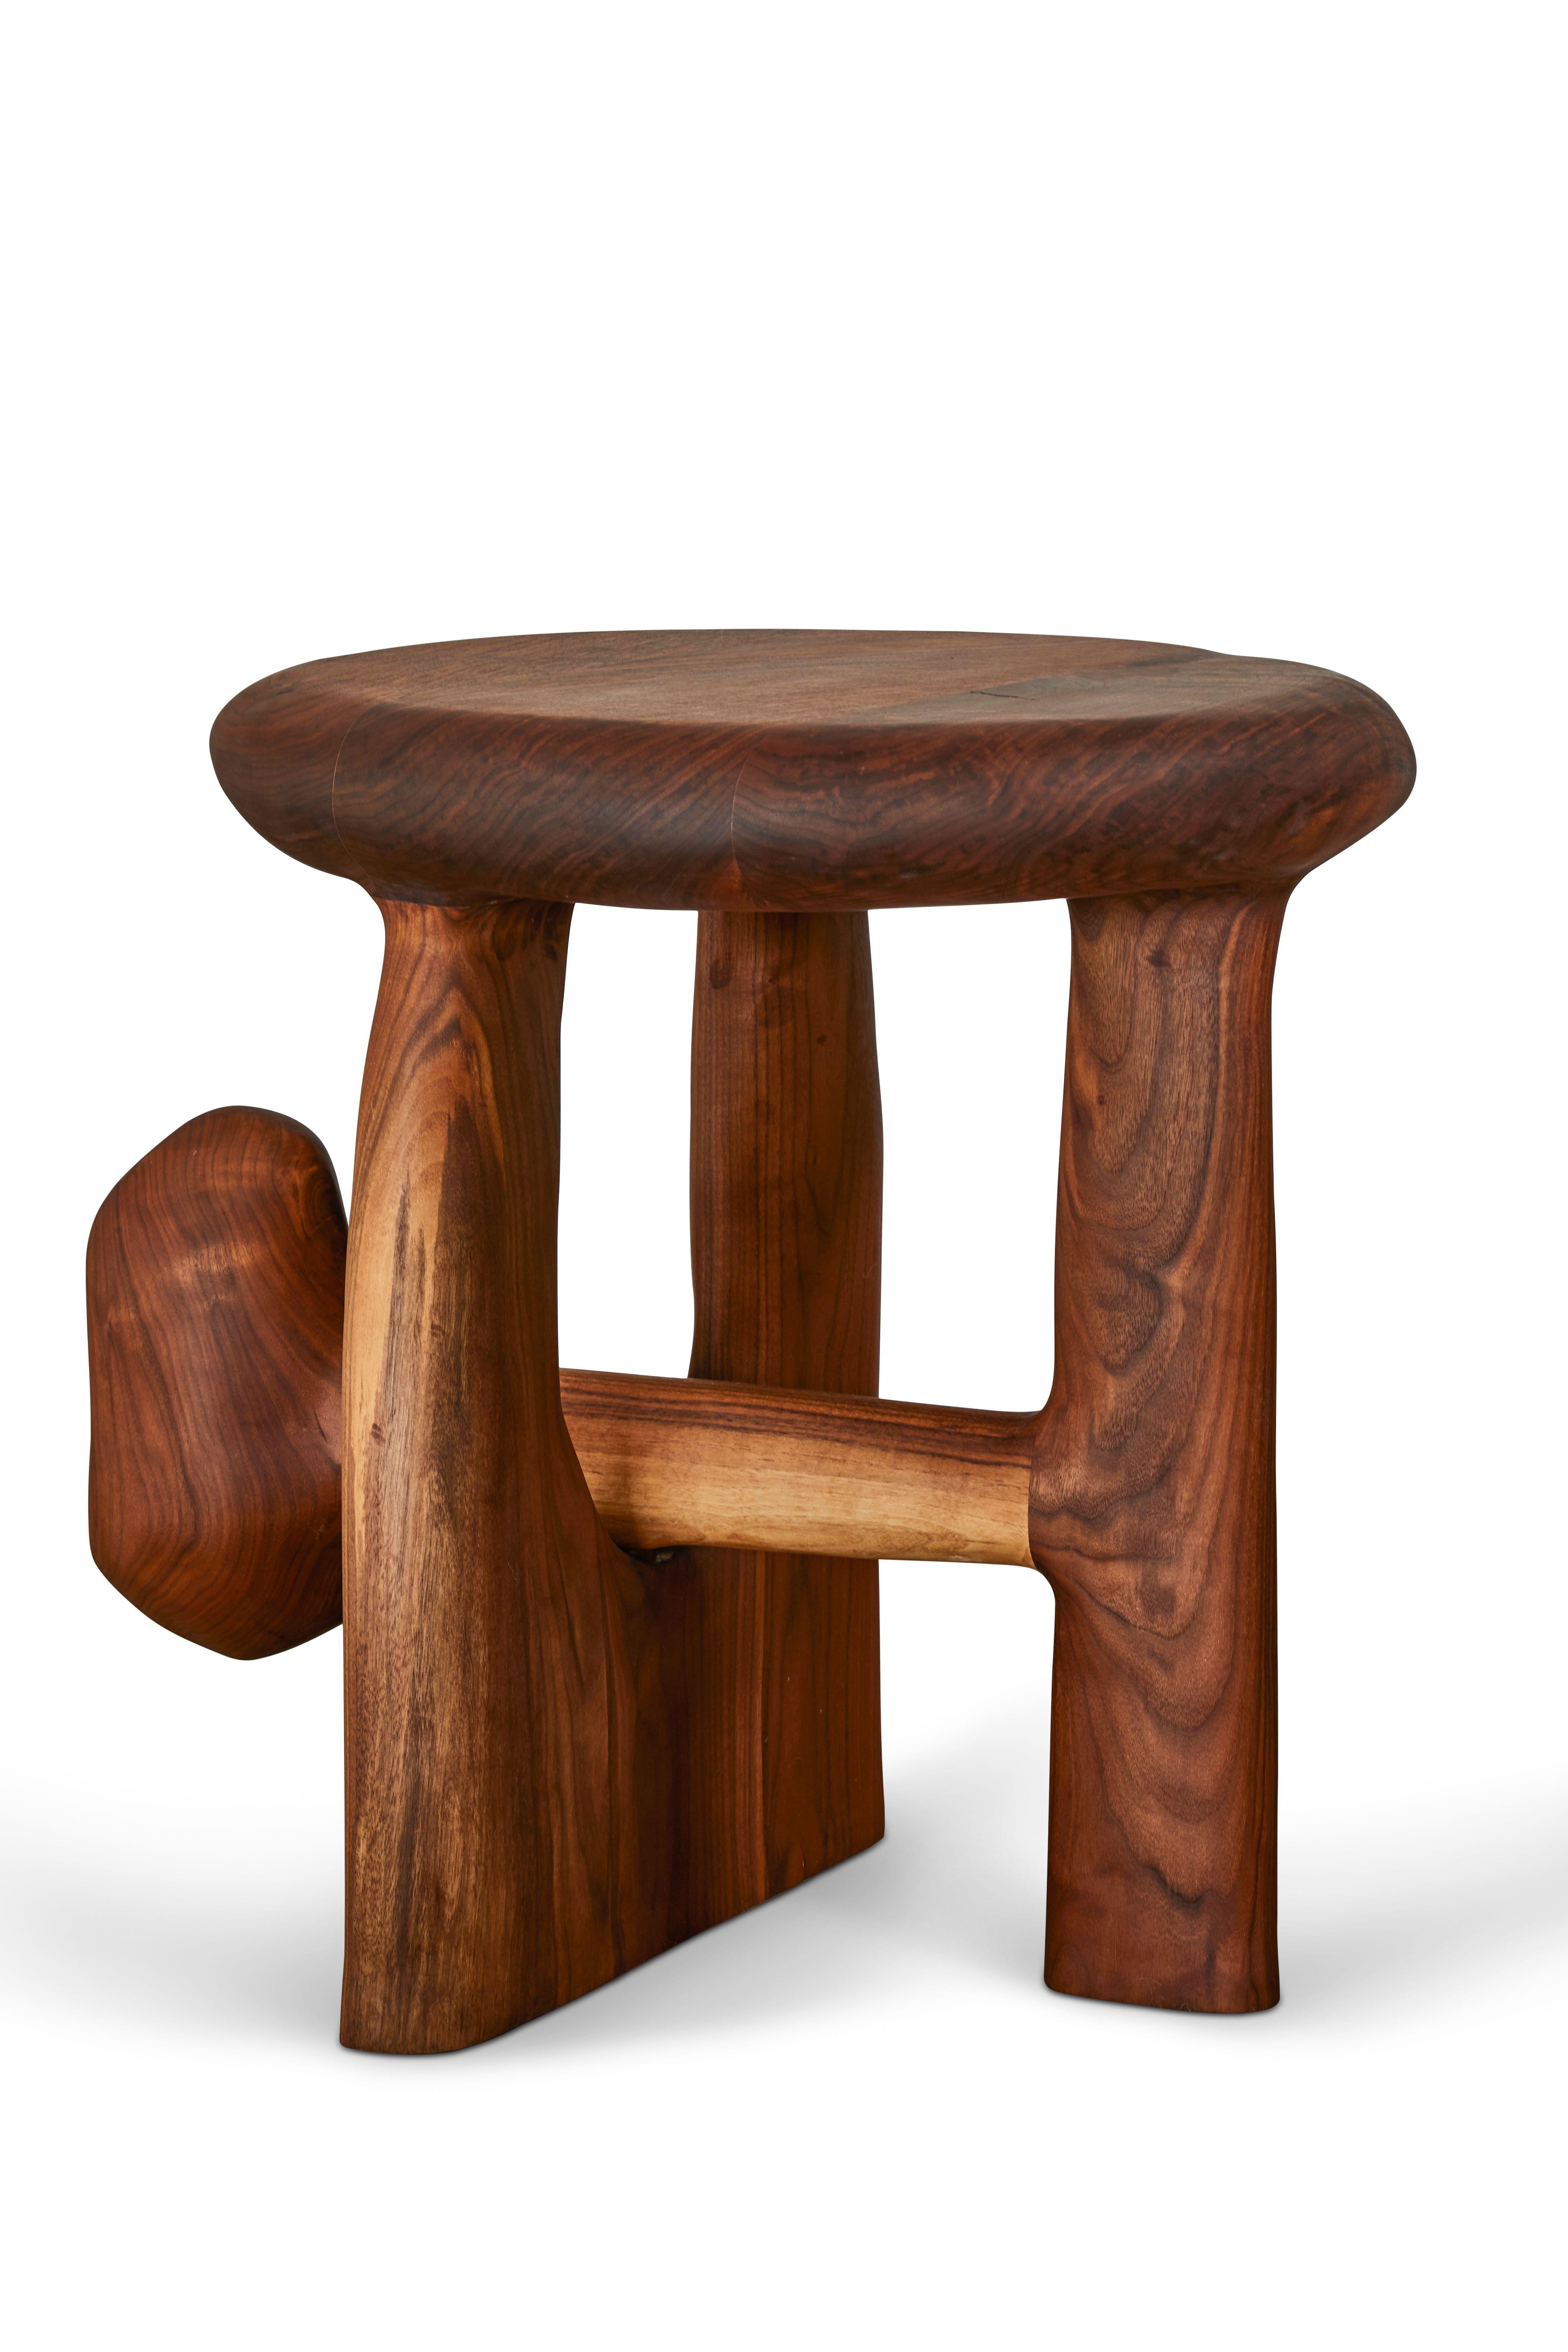 Sculptural organic hand carved, oiled walnut side table. Made in the USA by Casey McCafferty.


Available finishes:
Oiled black walnut, oiled white oak, bleached white oak, charred ash, oxidized maple

Customization is available. Charges may